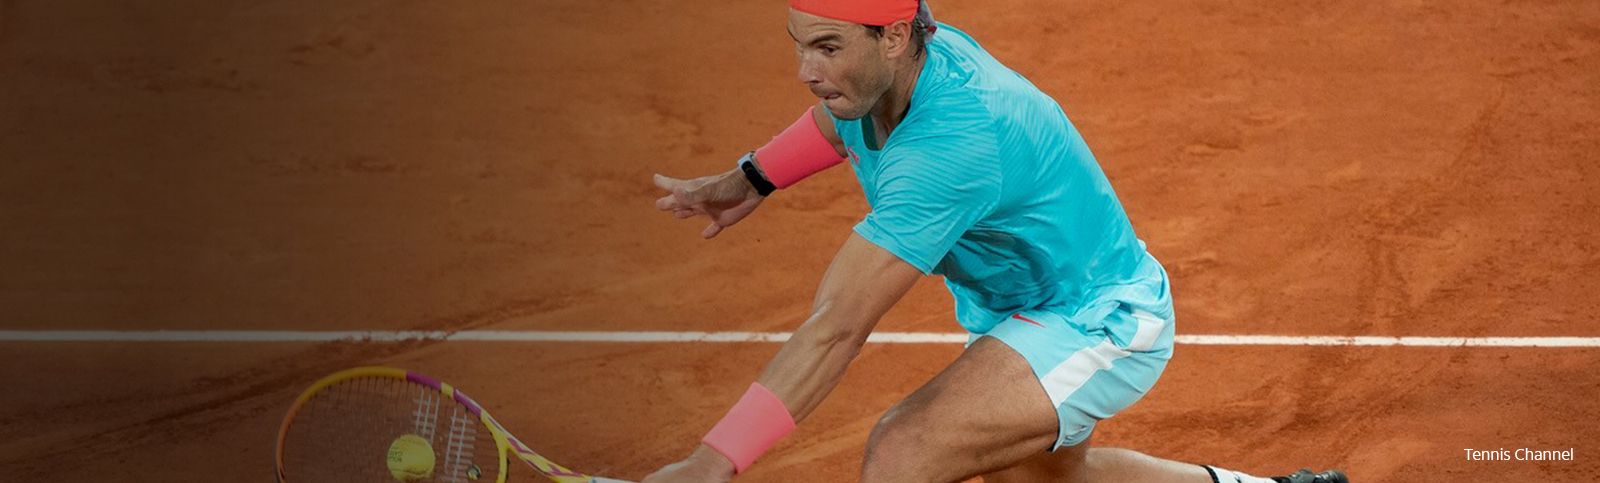 Rafael Nadal hits a backhand in a blue and orange tennis outfit